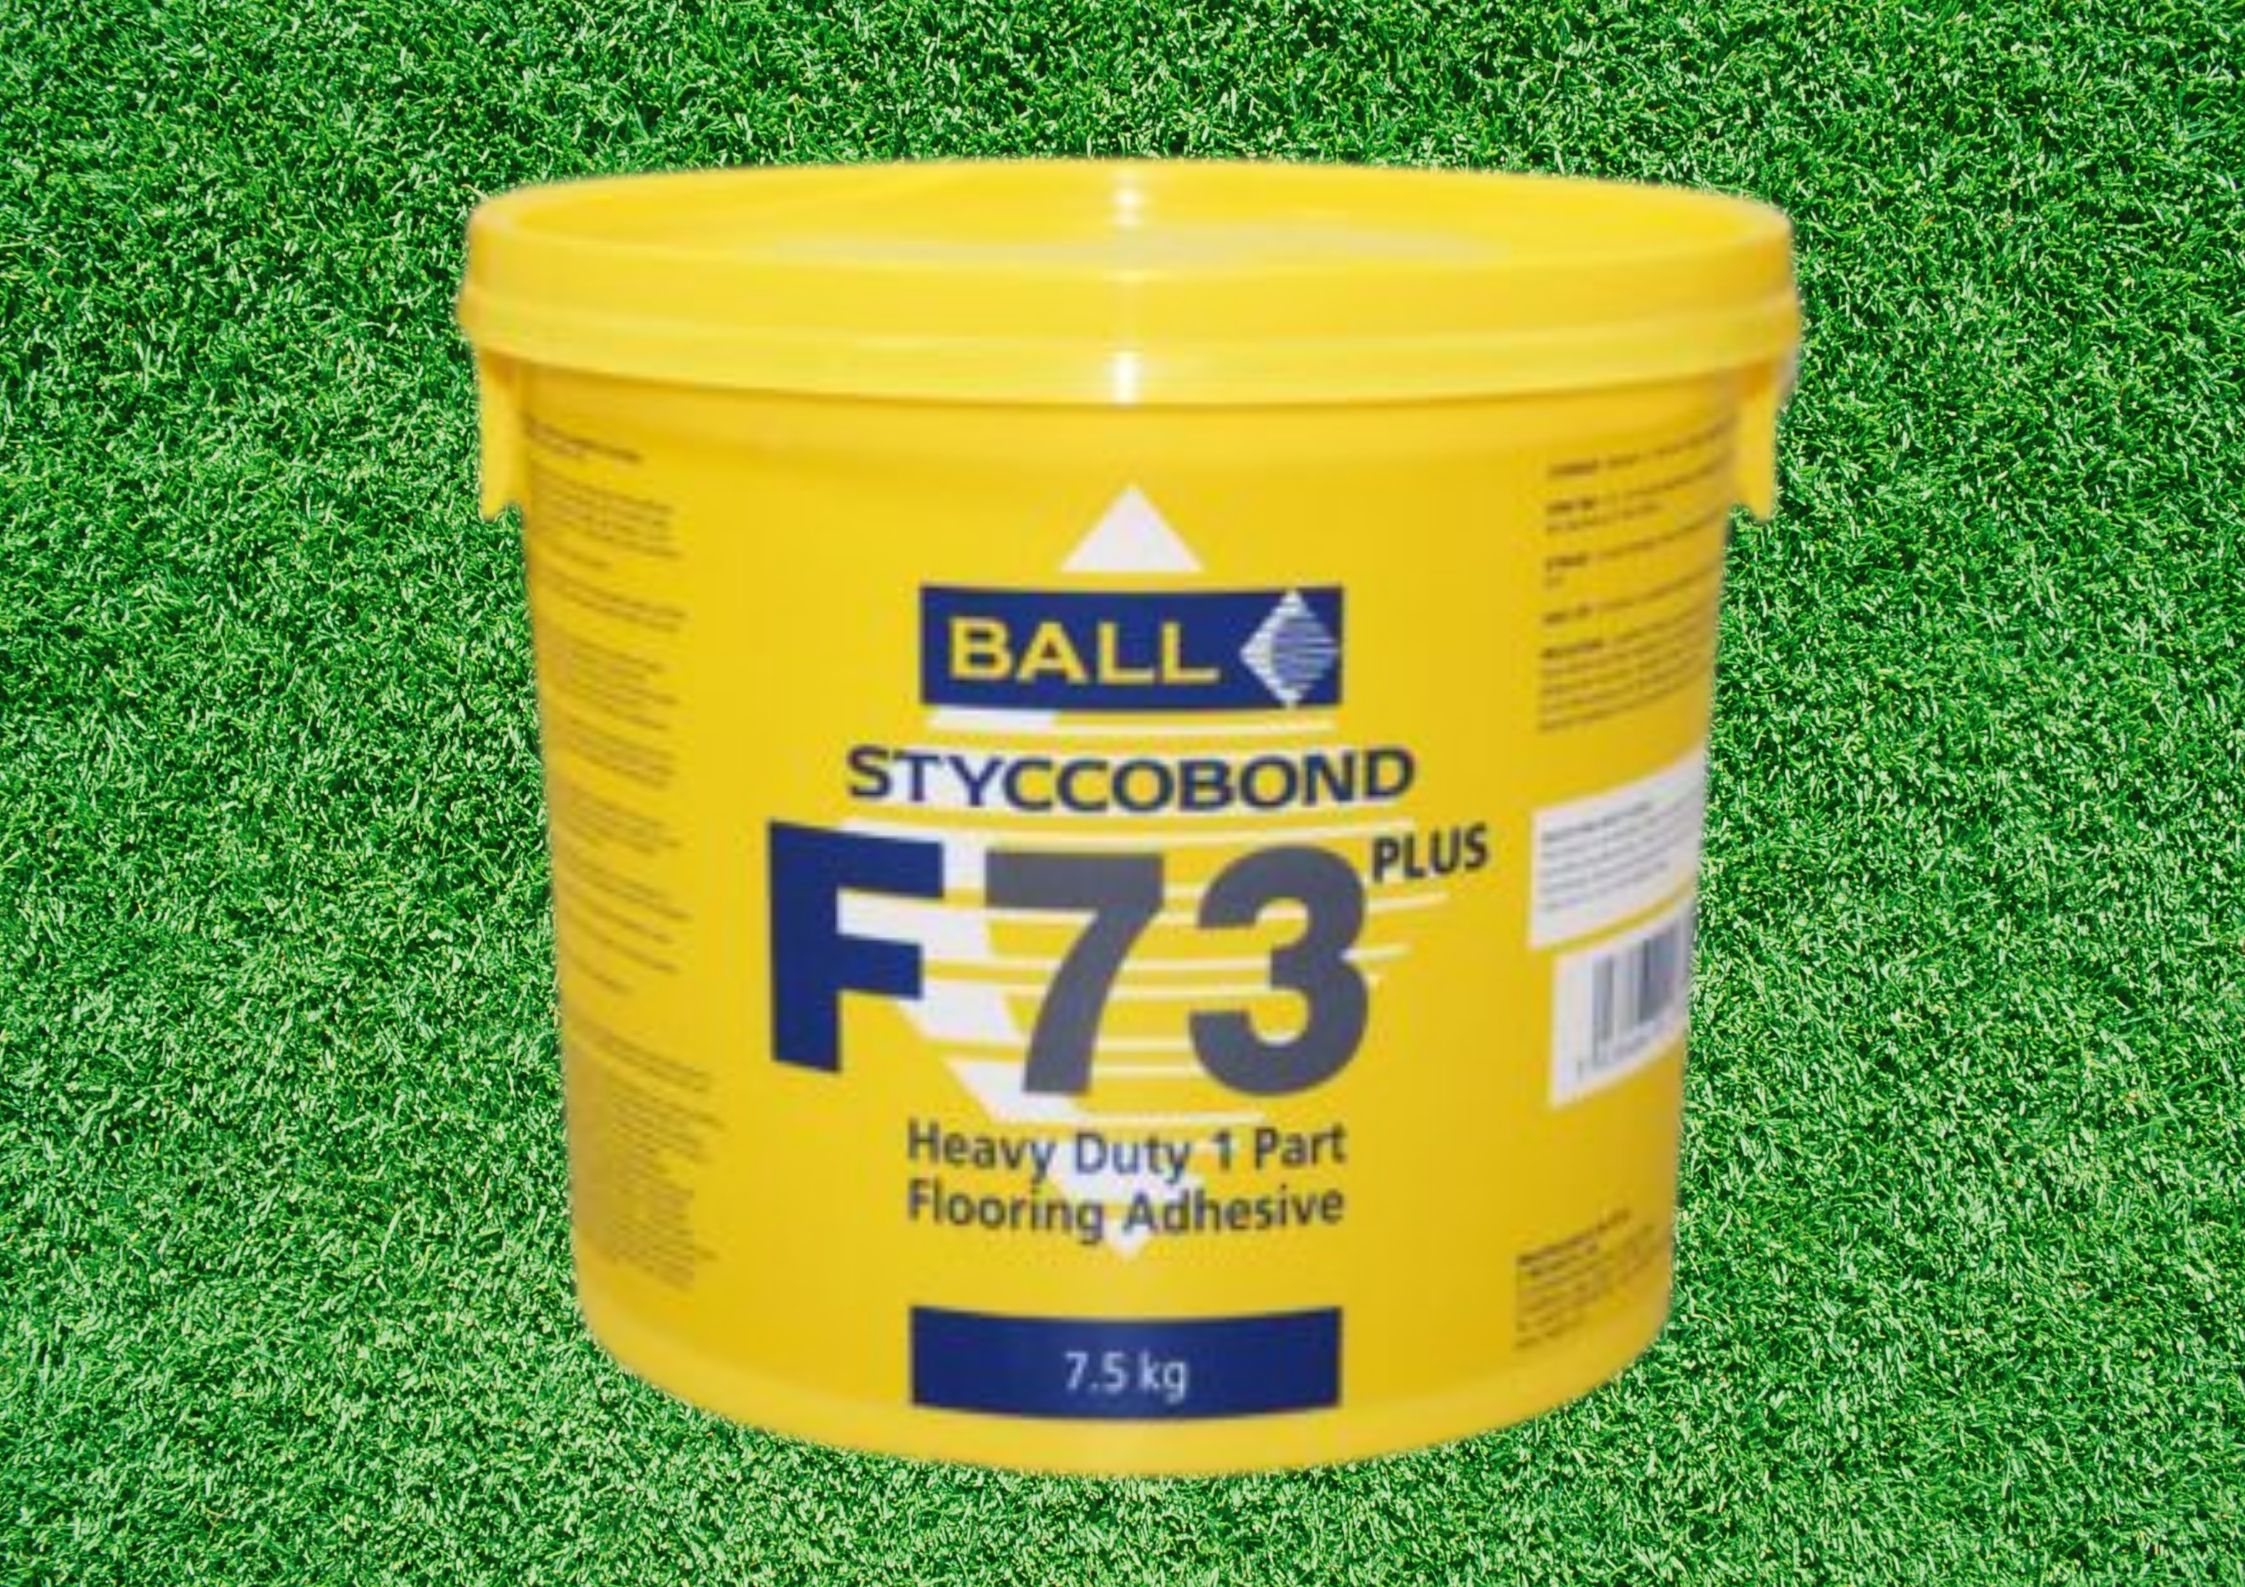 Adhesive for Artificial Grass